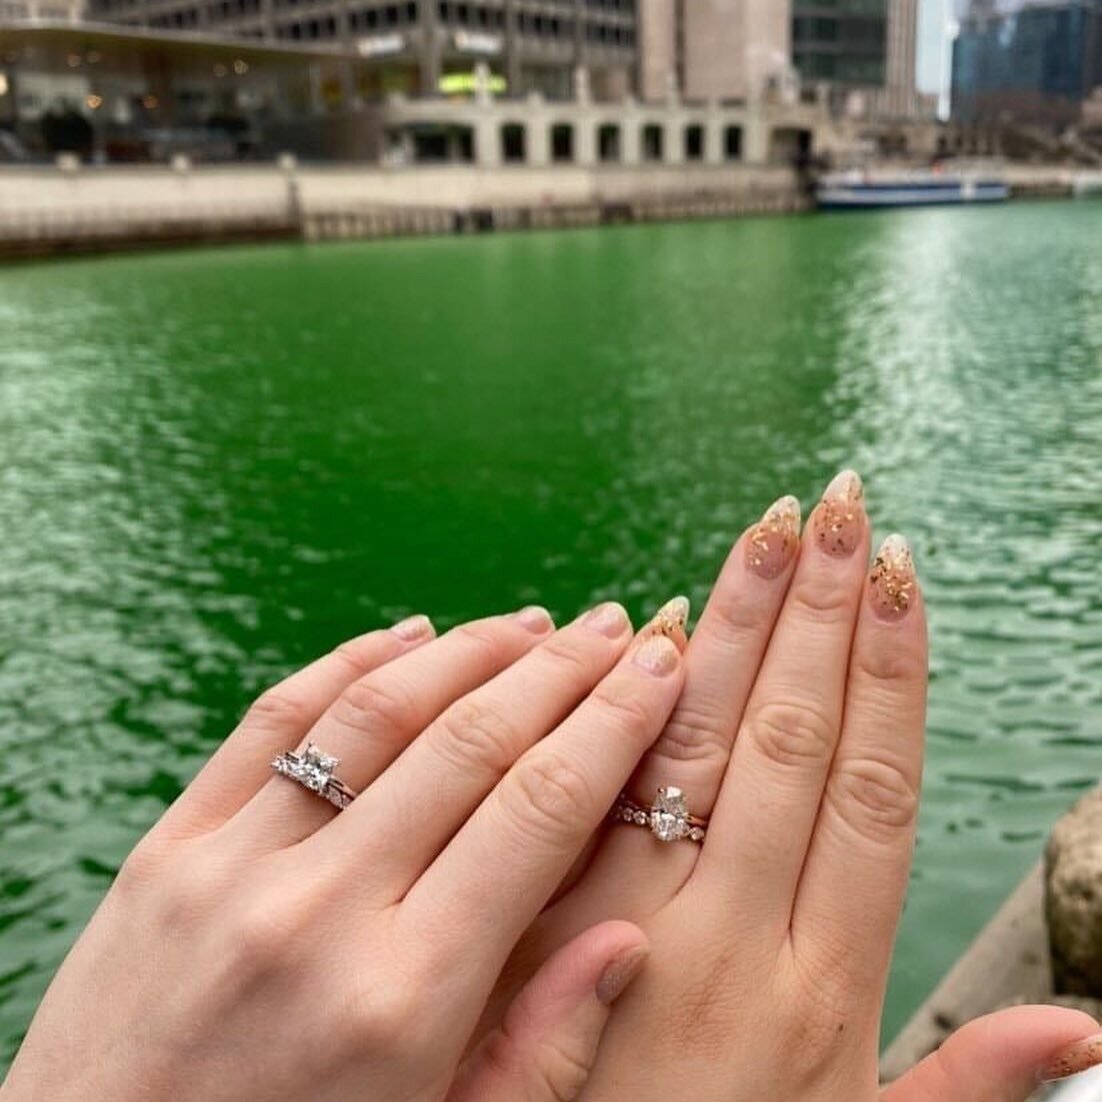 Happy Saint Patrick's Day! 🍀 This festive footage is brought to you by one of our #TrueGemAmbassadors @warichey_ &amp; her wife Emily! 
⠀⠀⠀⠀⠀⠀⠀⠀⠀
These lovebirds were wed this past weekend and we could not be more excited for them! The True Gem team